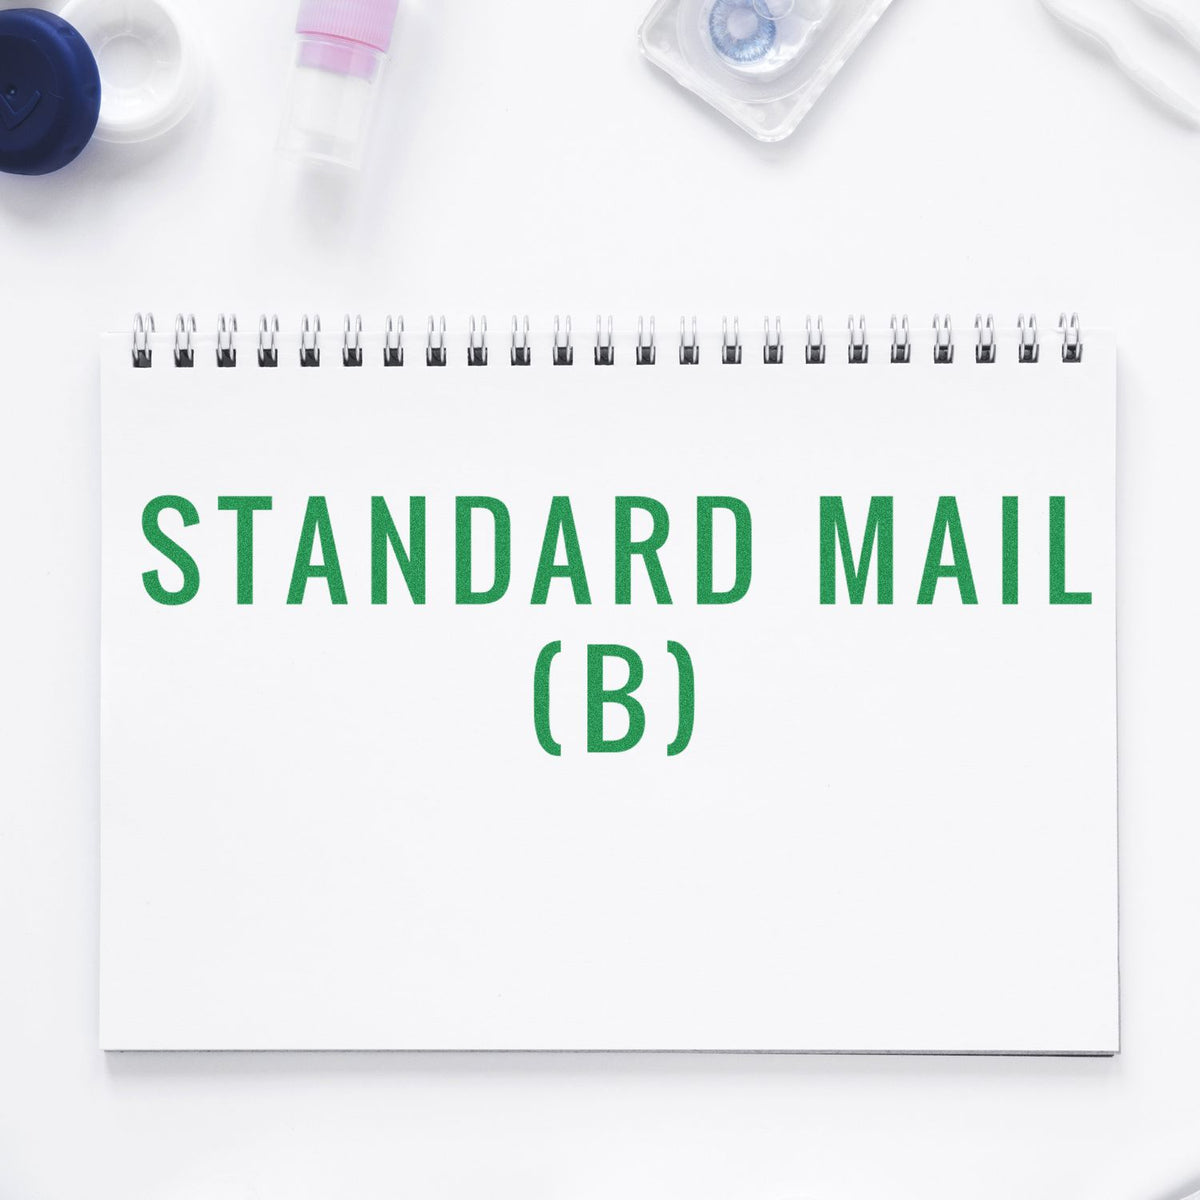 Self-Inking Standard Mail (B) Stamp In Use